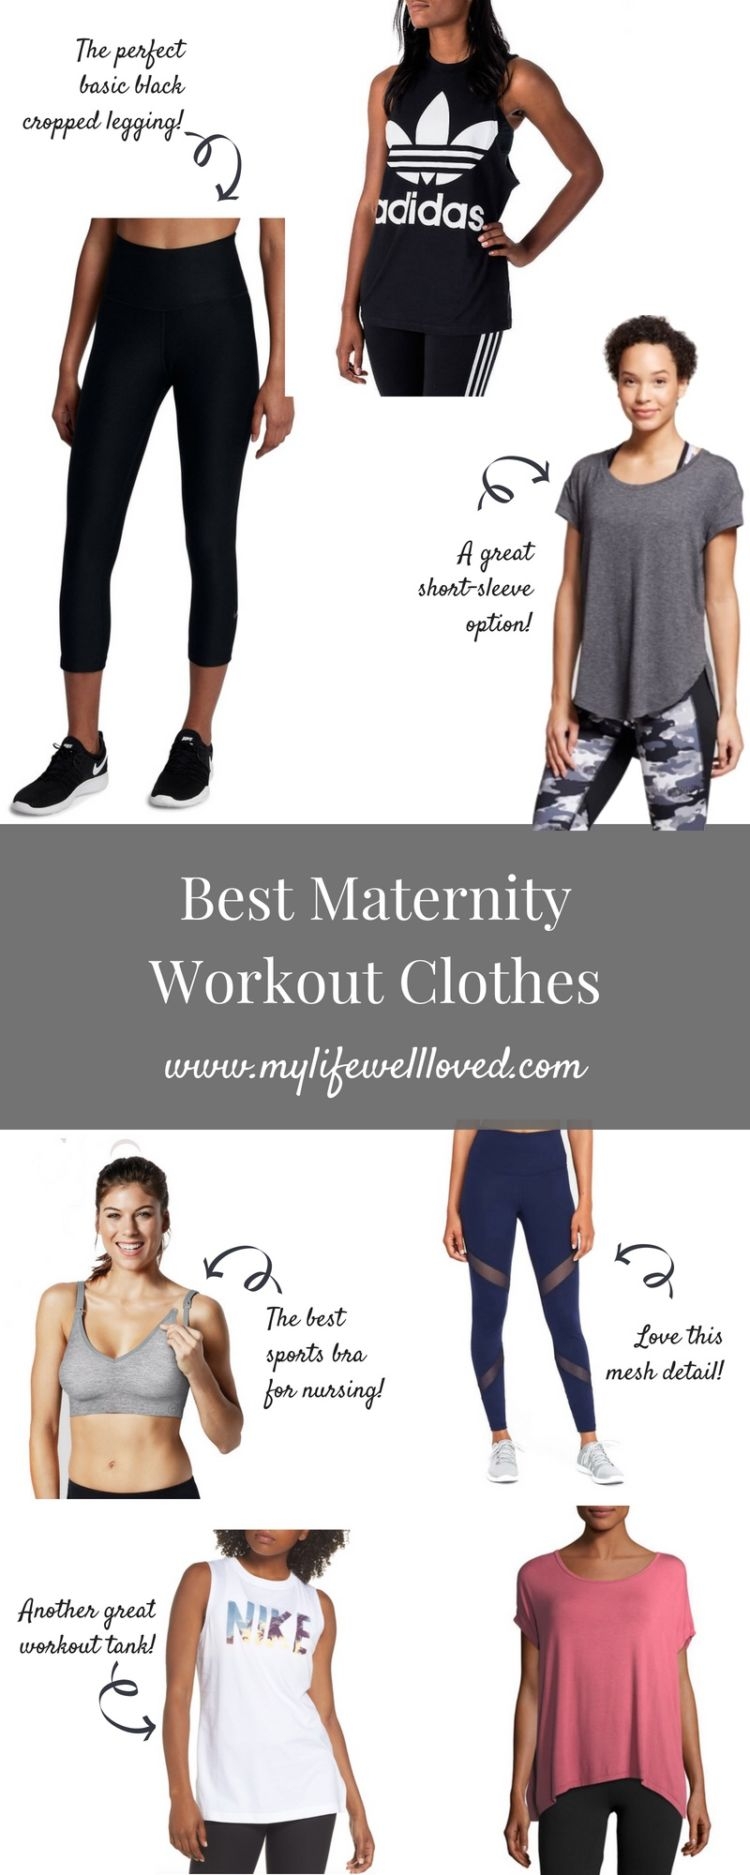 The Best Maternity Workout Clothes - Healthy By Heather Brown